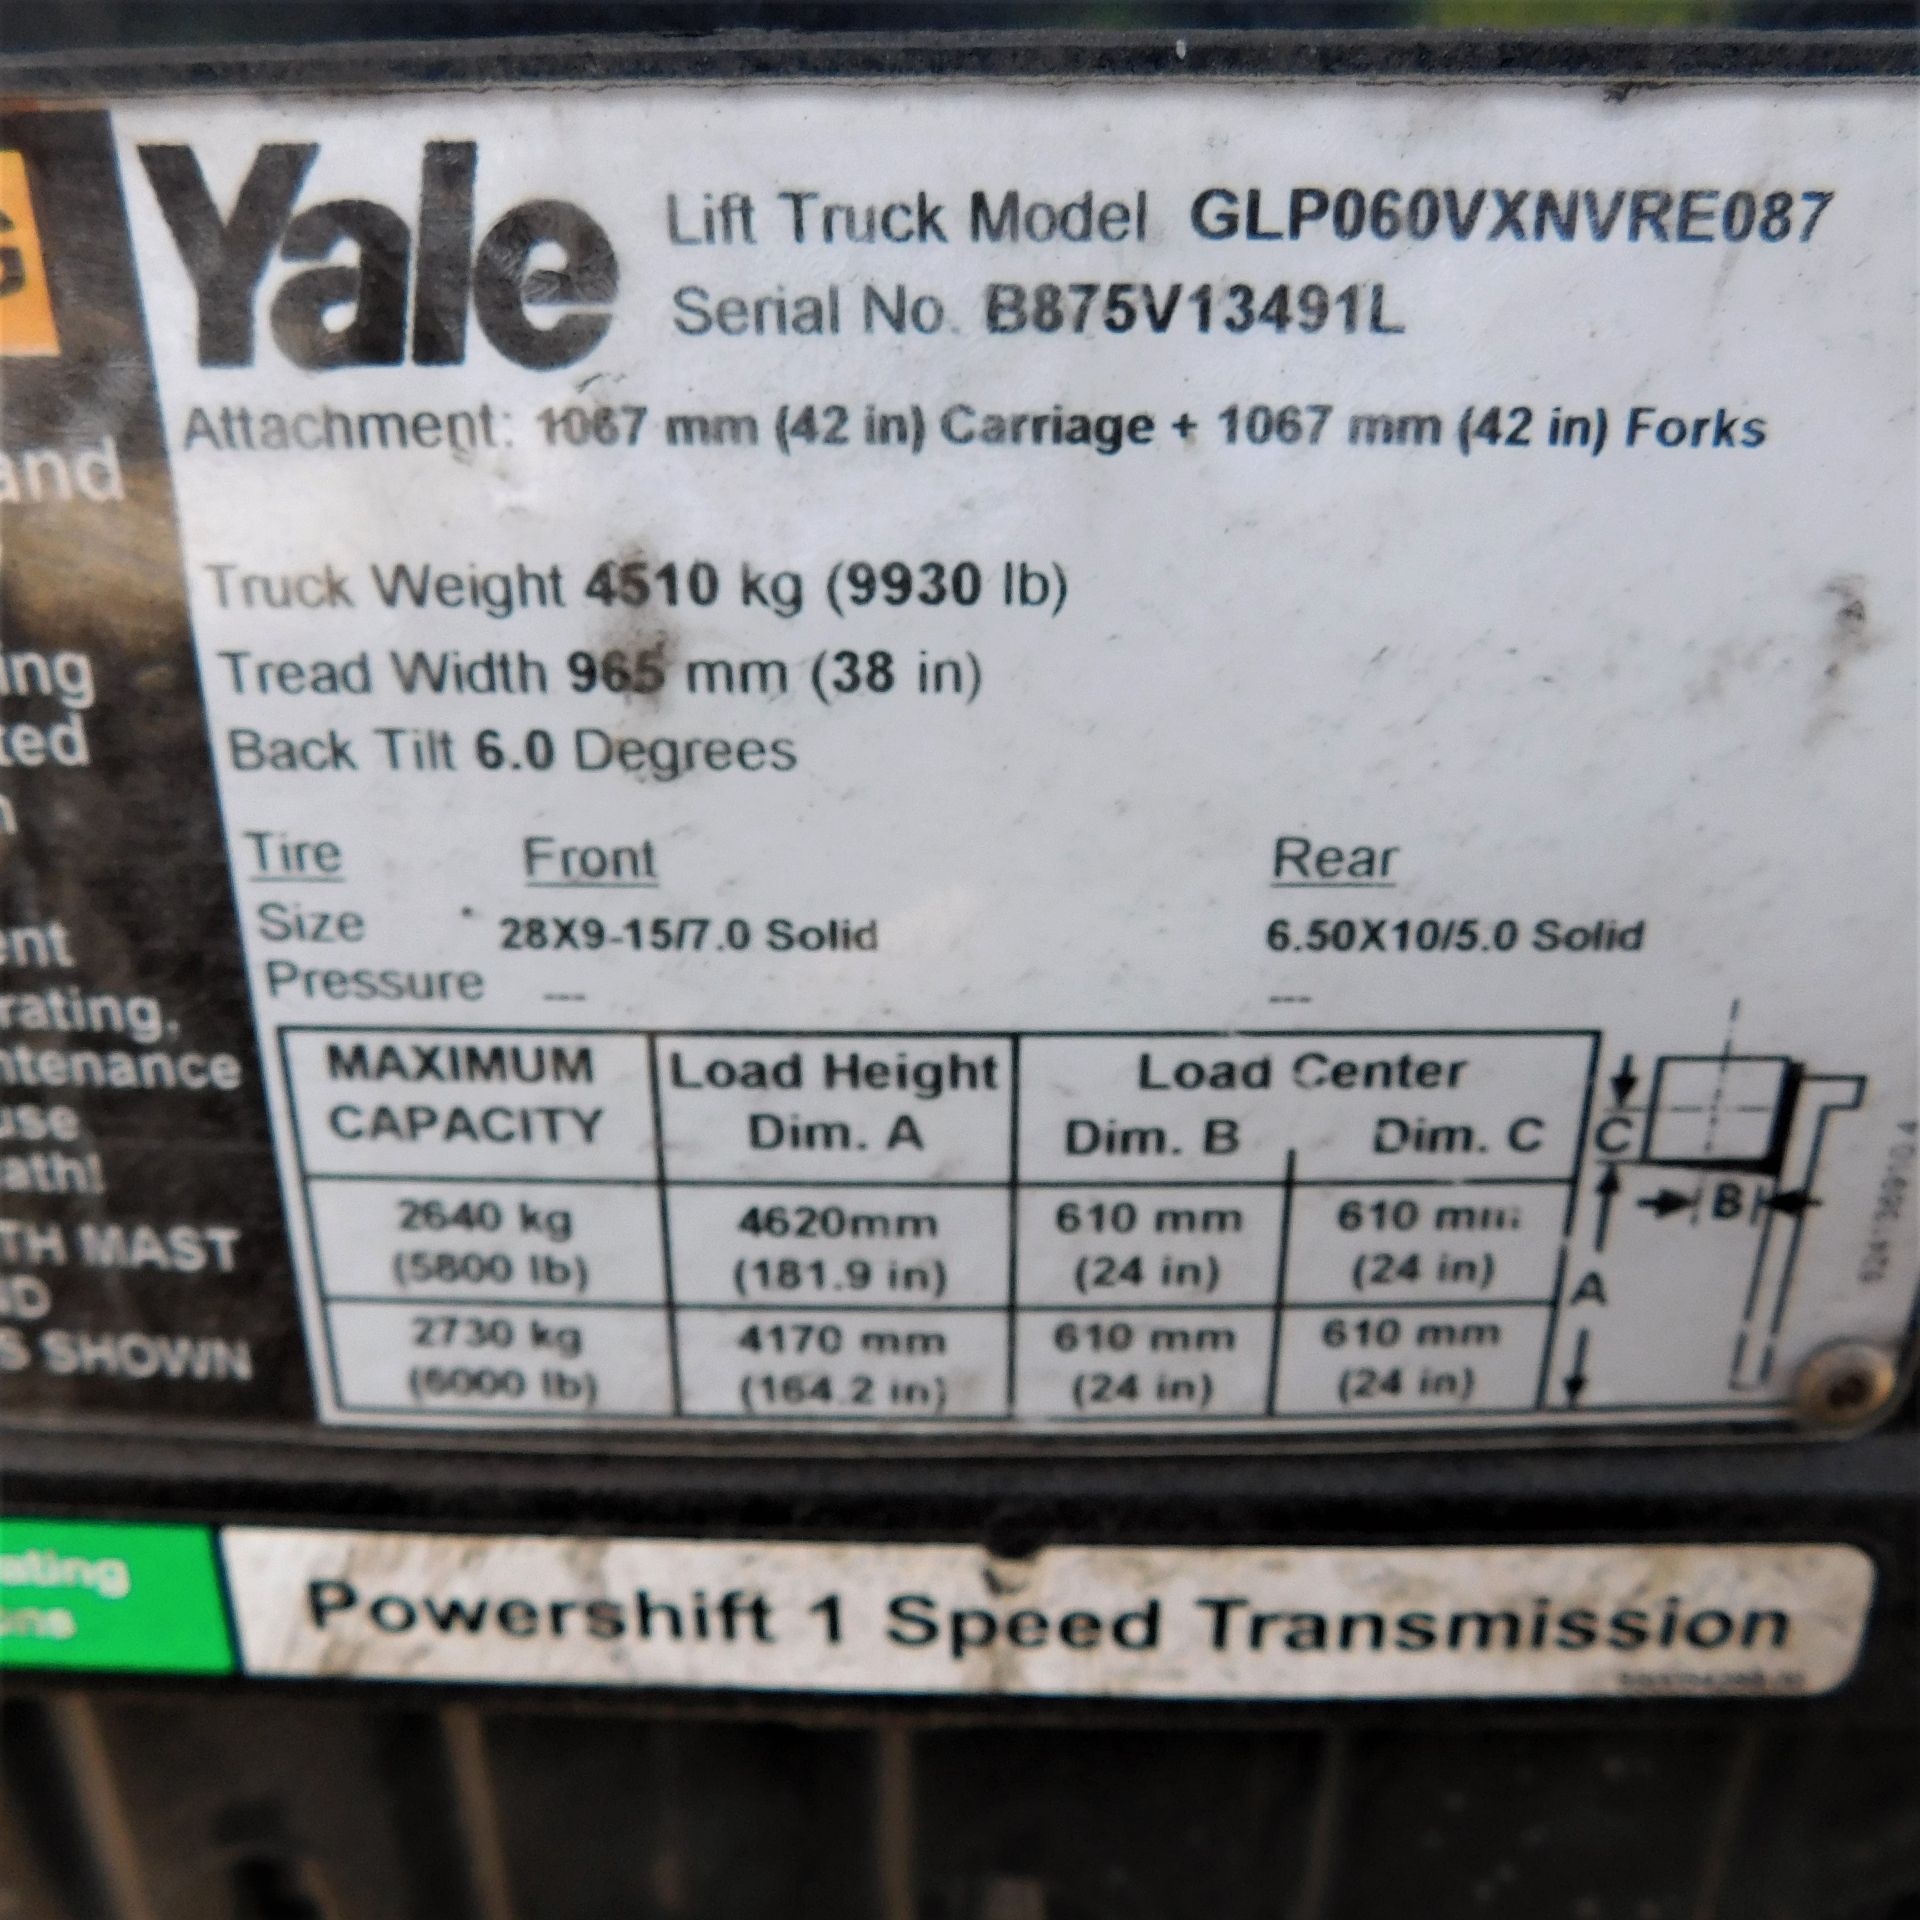 OUT OF SERVICE YALE LPG FORKLIFT, MODEL GLP060VXNVRE087, S/N B875V13491L, 3-STAGE MAST, ROTATOR ATTA - Image 5 of 5